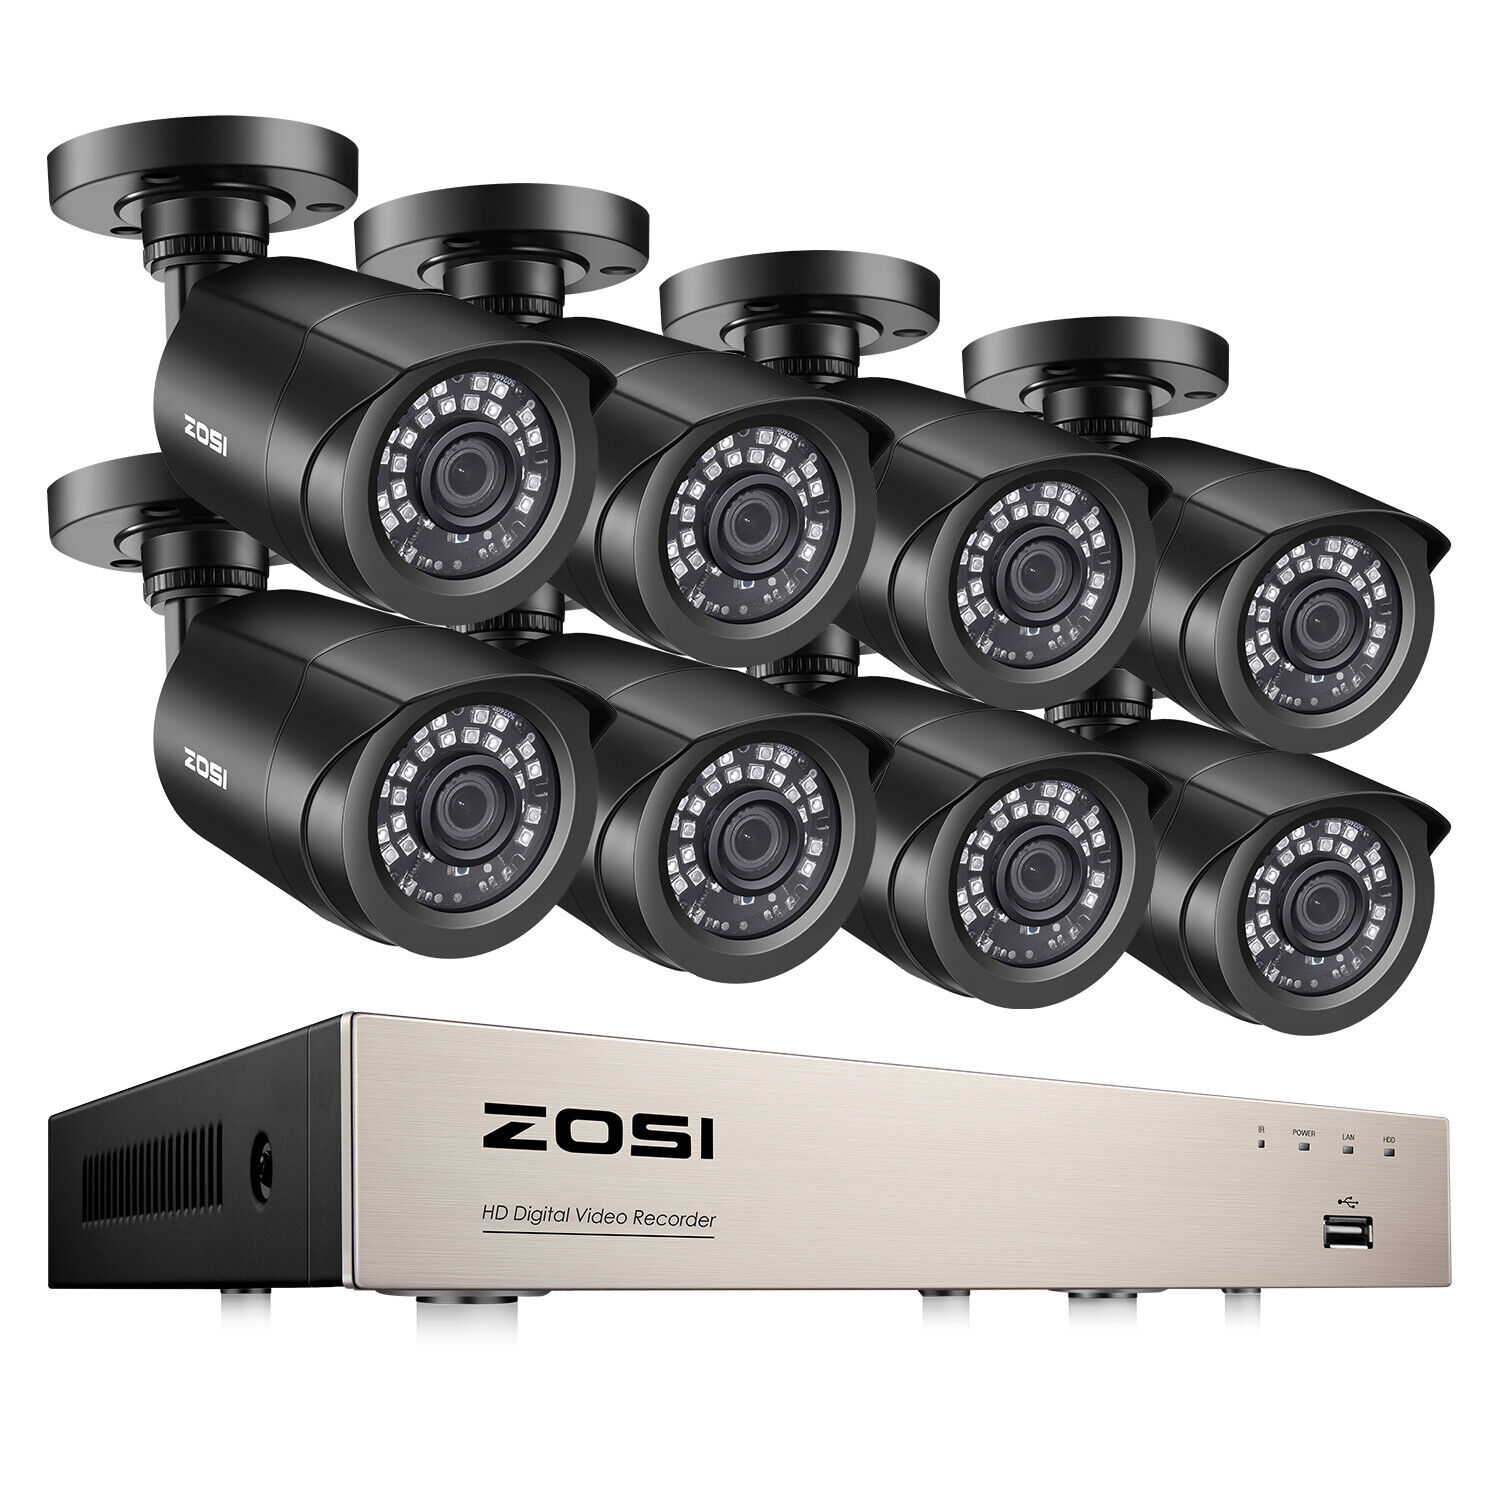 ZOSI 8CH 5MP Lite DVR 1080P Outdoor CCTV Security Camera System Kit Night Vision ZOSI 8VN-106B8S-00-US-A4